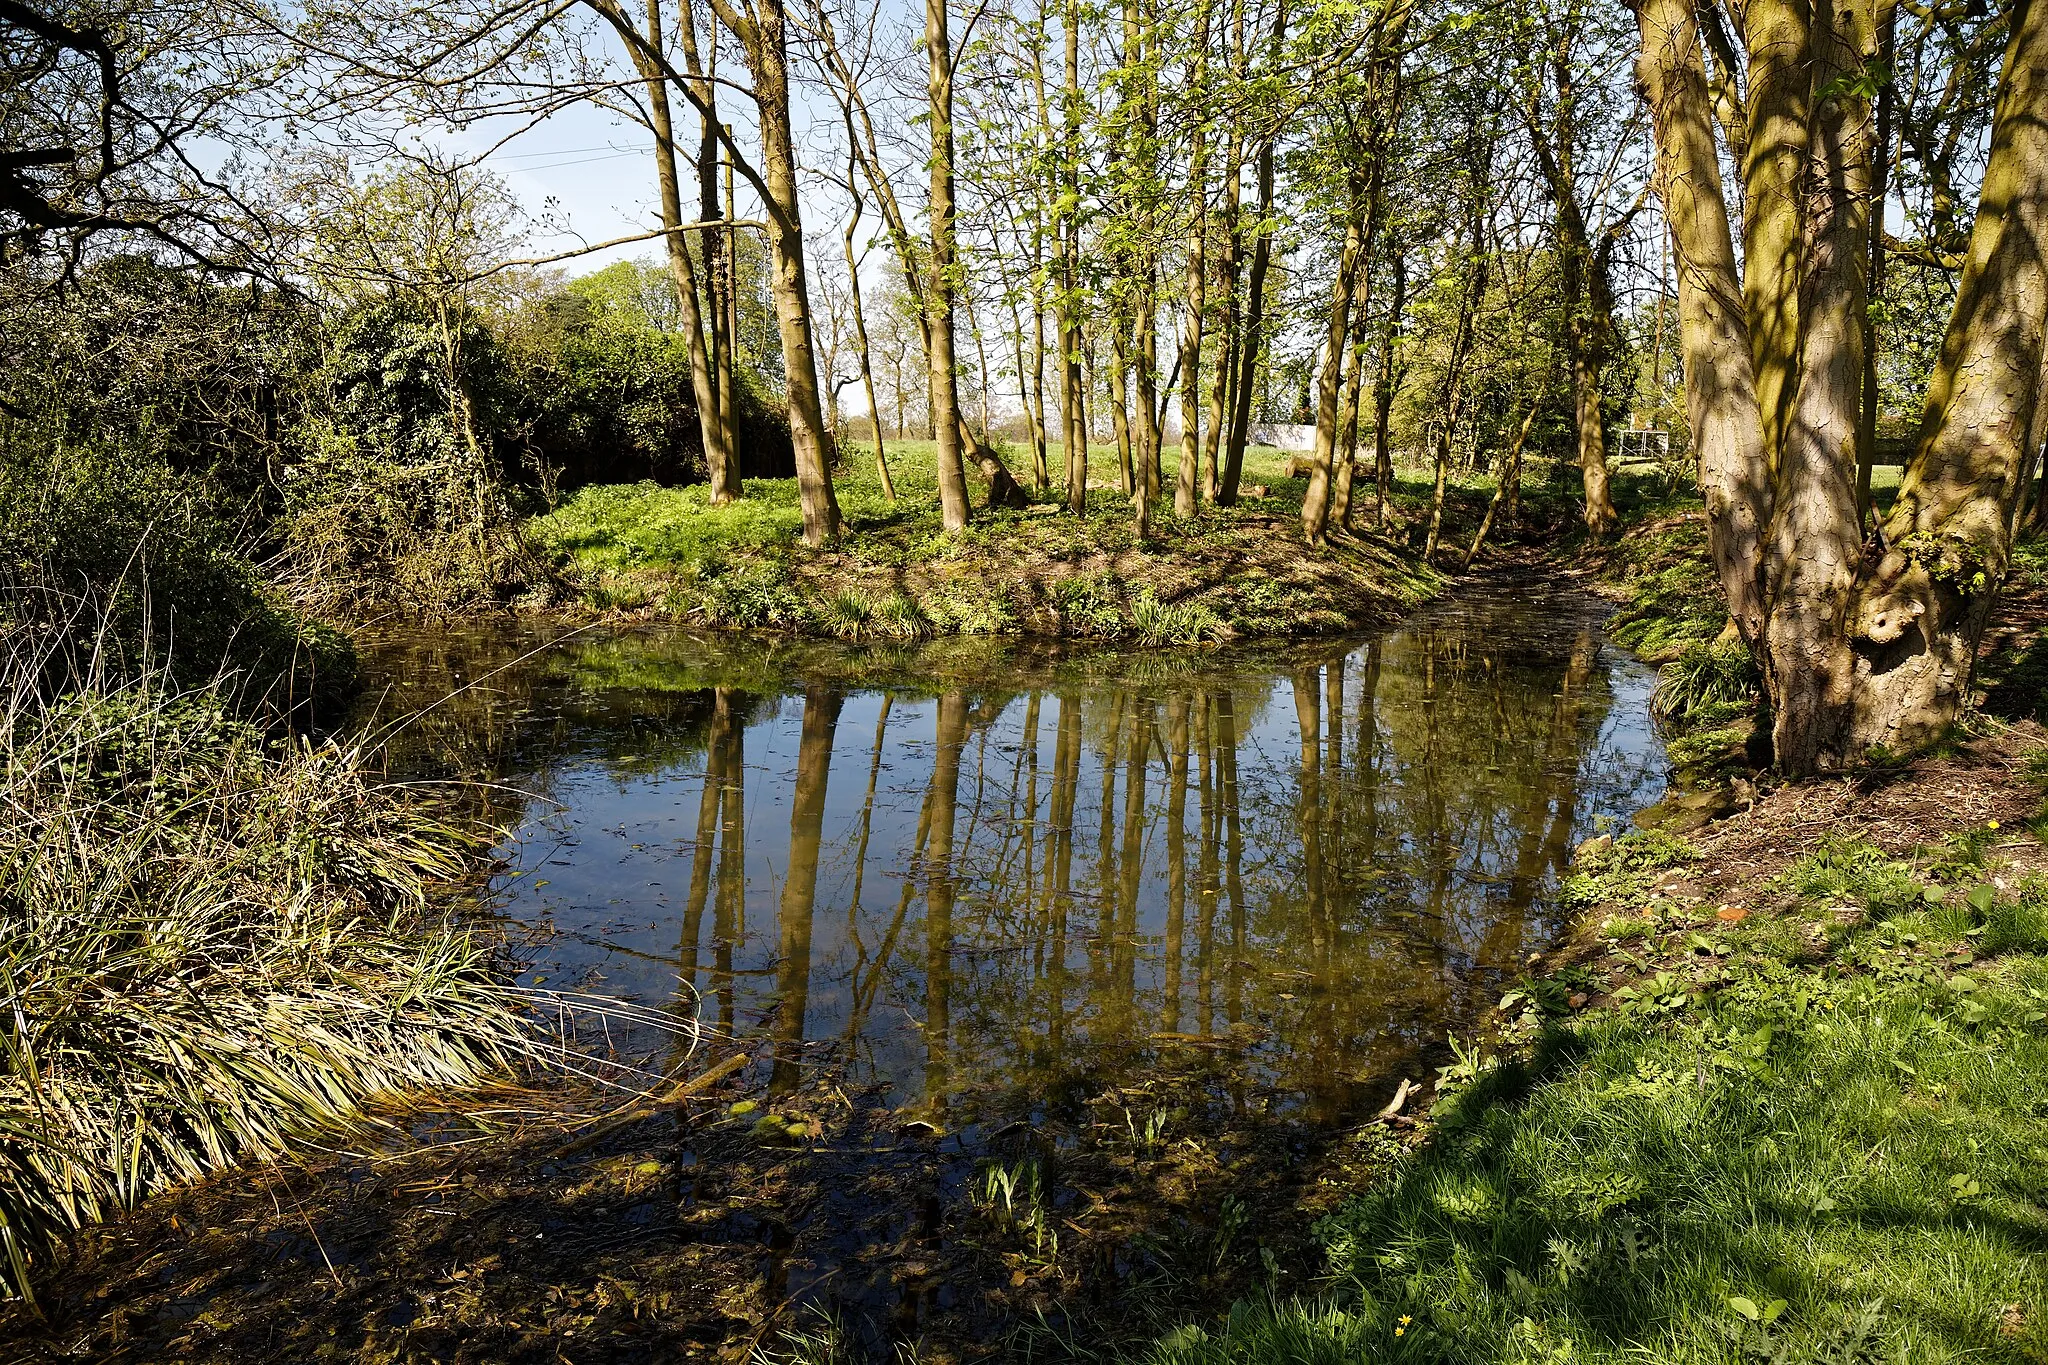 Photo showing: Roadside pond on Fitzjohn's Lane, Great Canfield, in Essex, England. Camera: Canon EOS 6D Mark II with Canon EF 24-105mm F4L IS USM lens. Software: RAW file lens-corrected, optimized and downsized with DxO PhotoLab, Viewpoint 3, and Adobe Photoshop CS2.